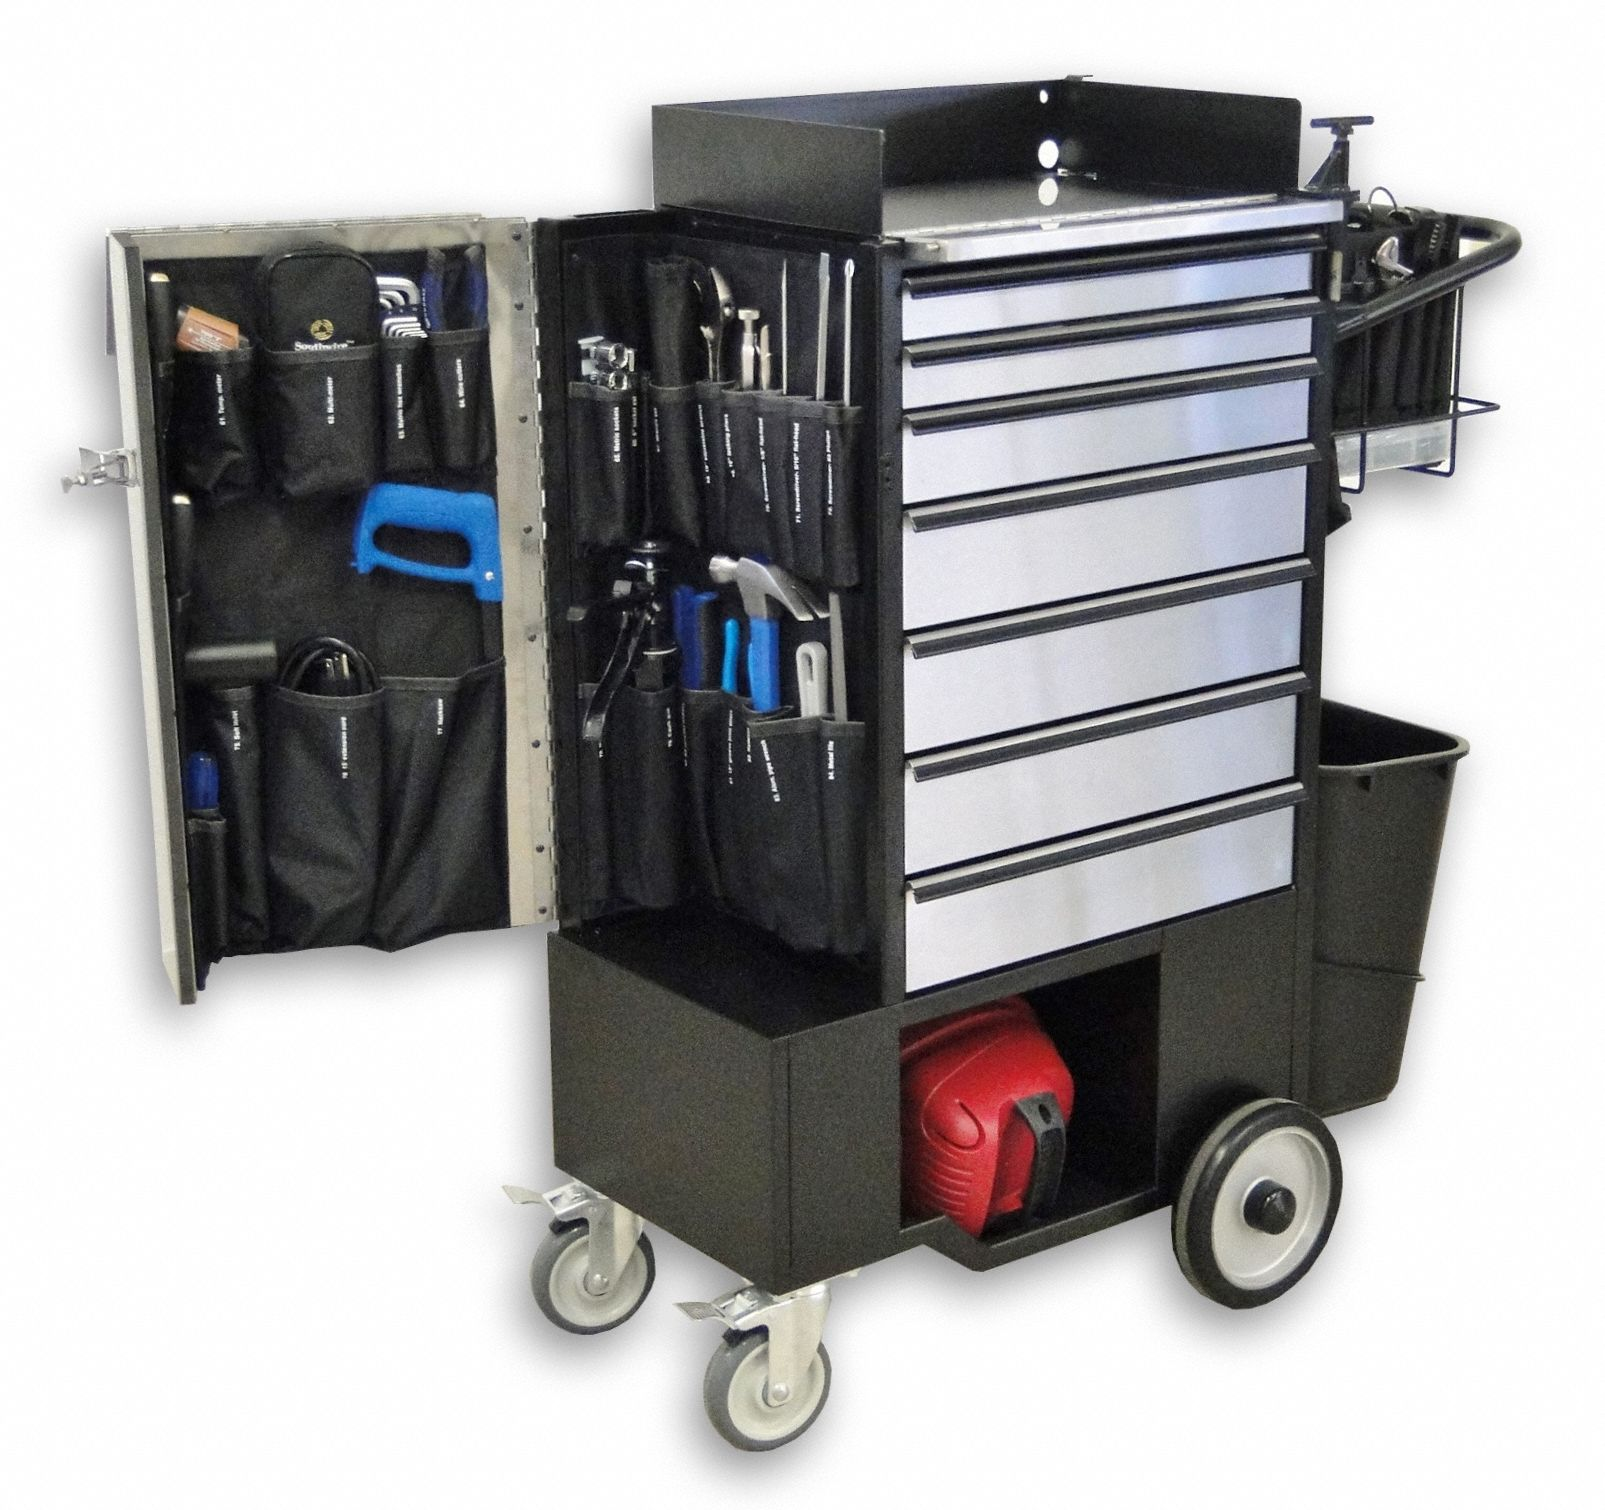 Specialized service cart for maintenance services